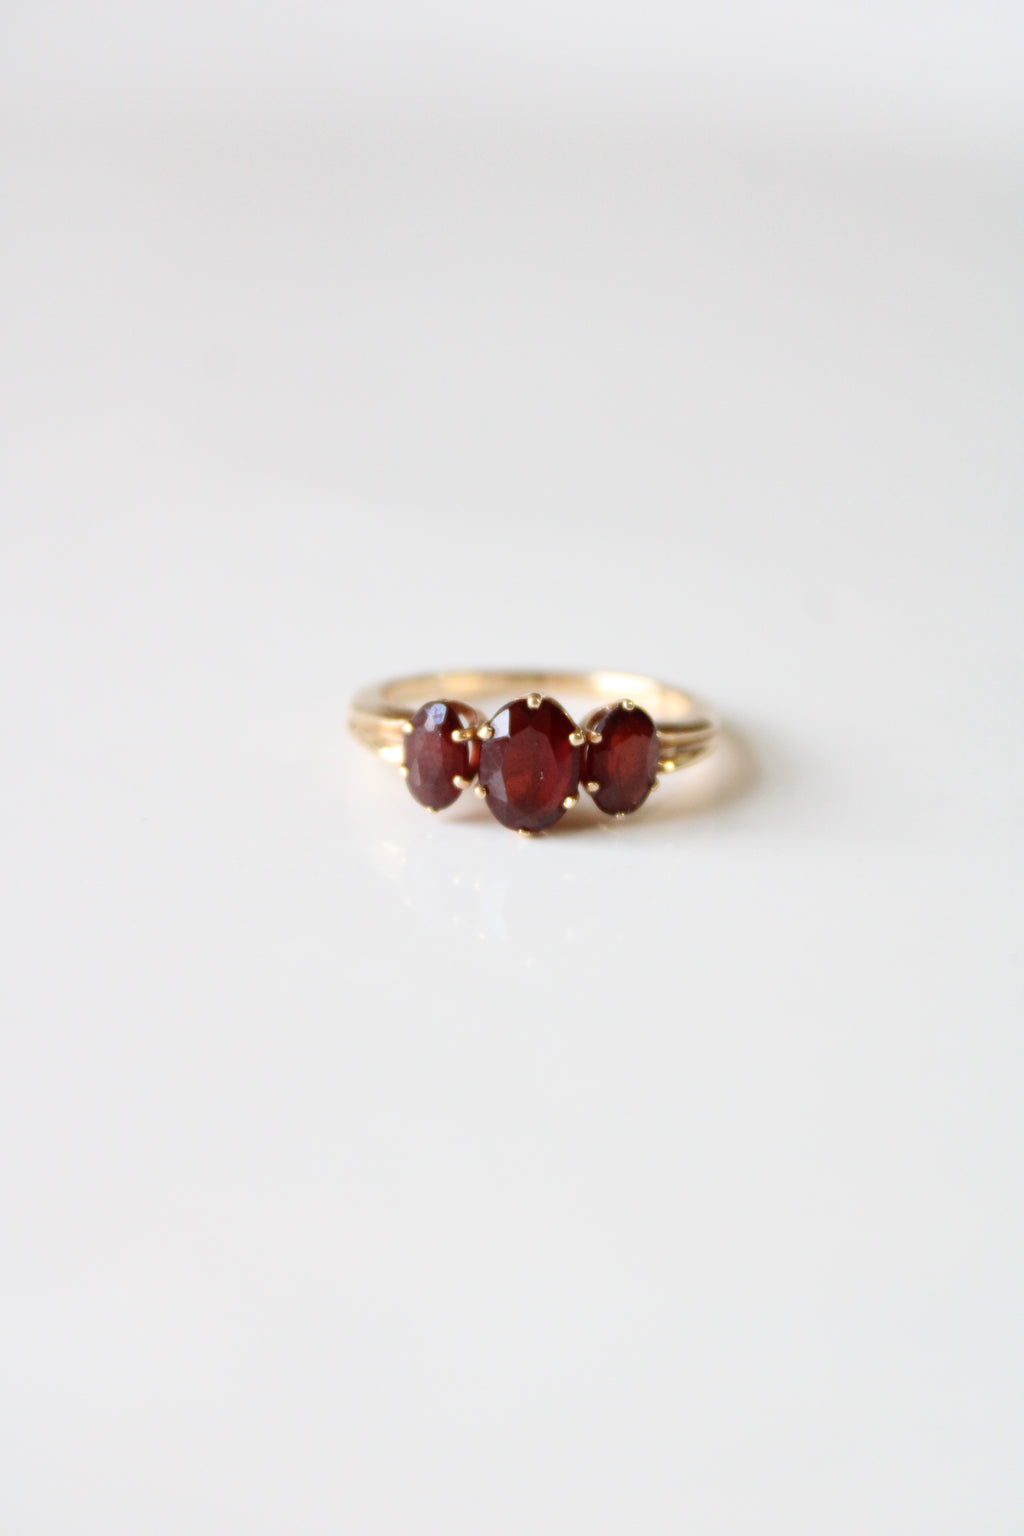 14KT Yellow Gold Garnet Oval 3 Stone Ring | Size 6